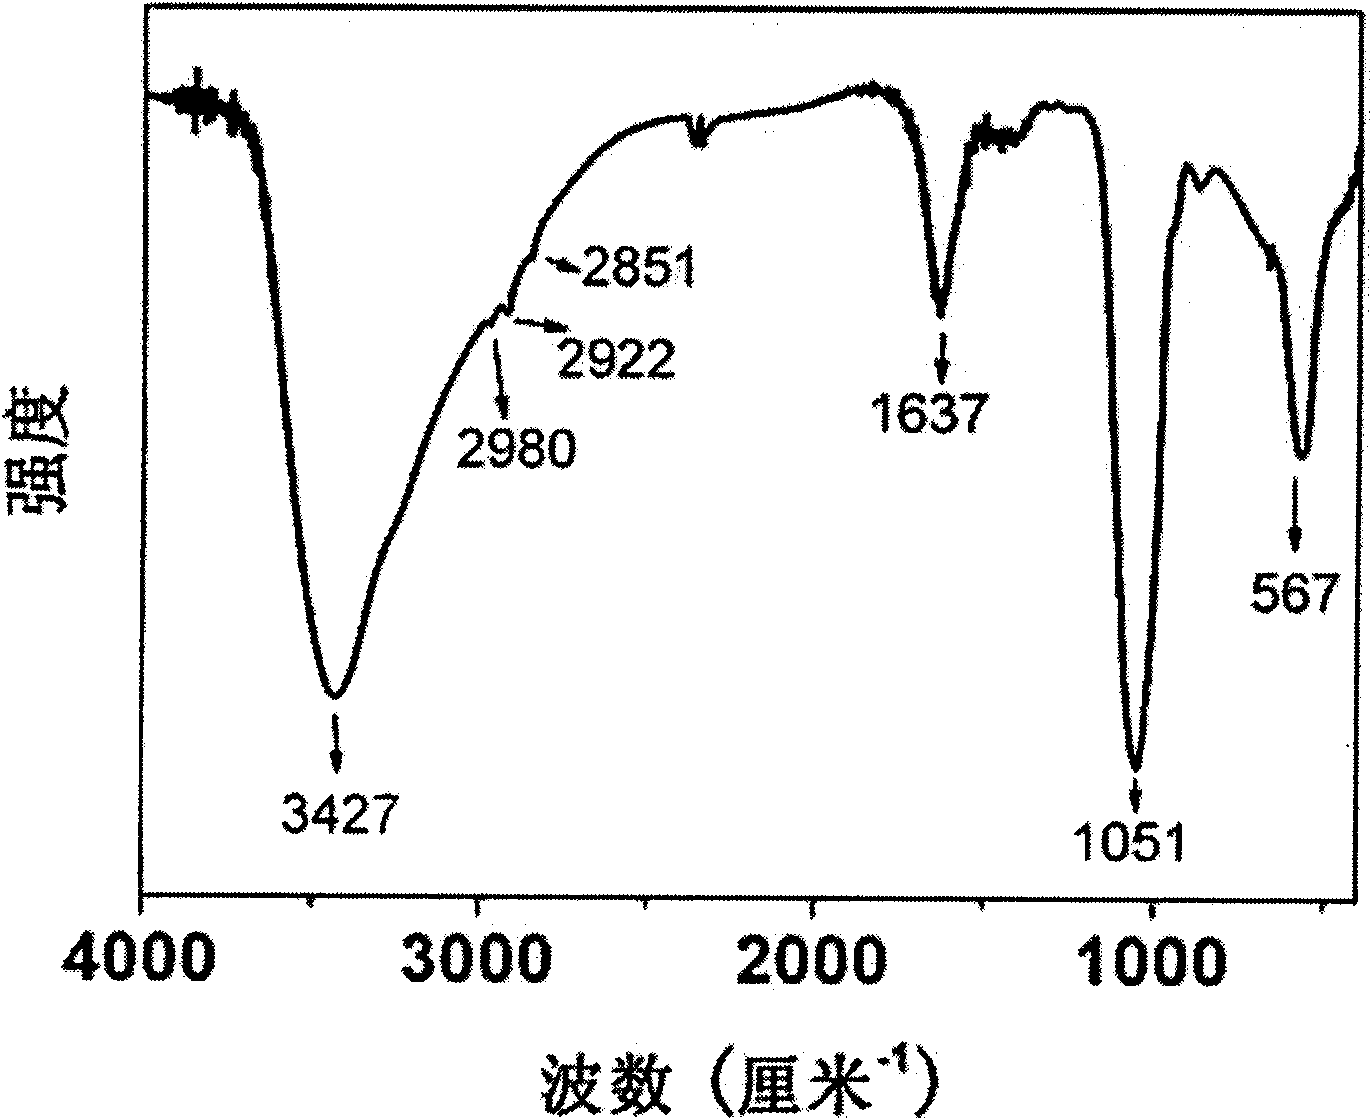 Triblock copolymer PEO-PPO-PEO/calcium phosphate nanometer composite material and preparation method thereof